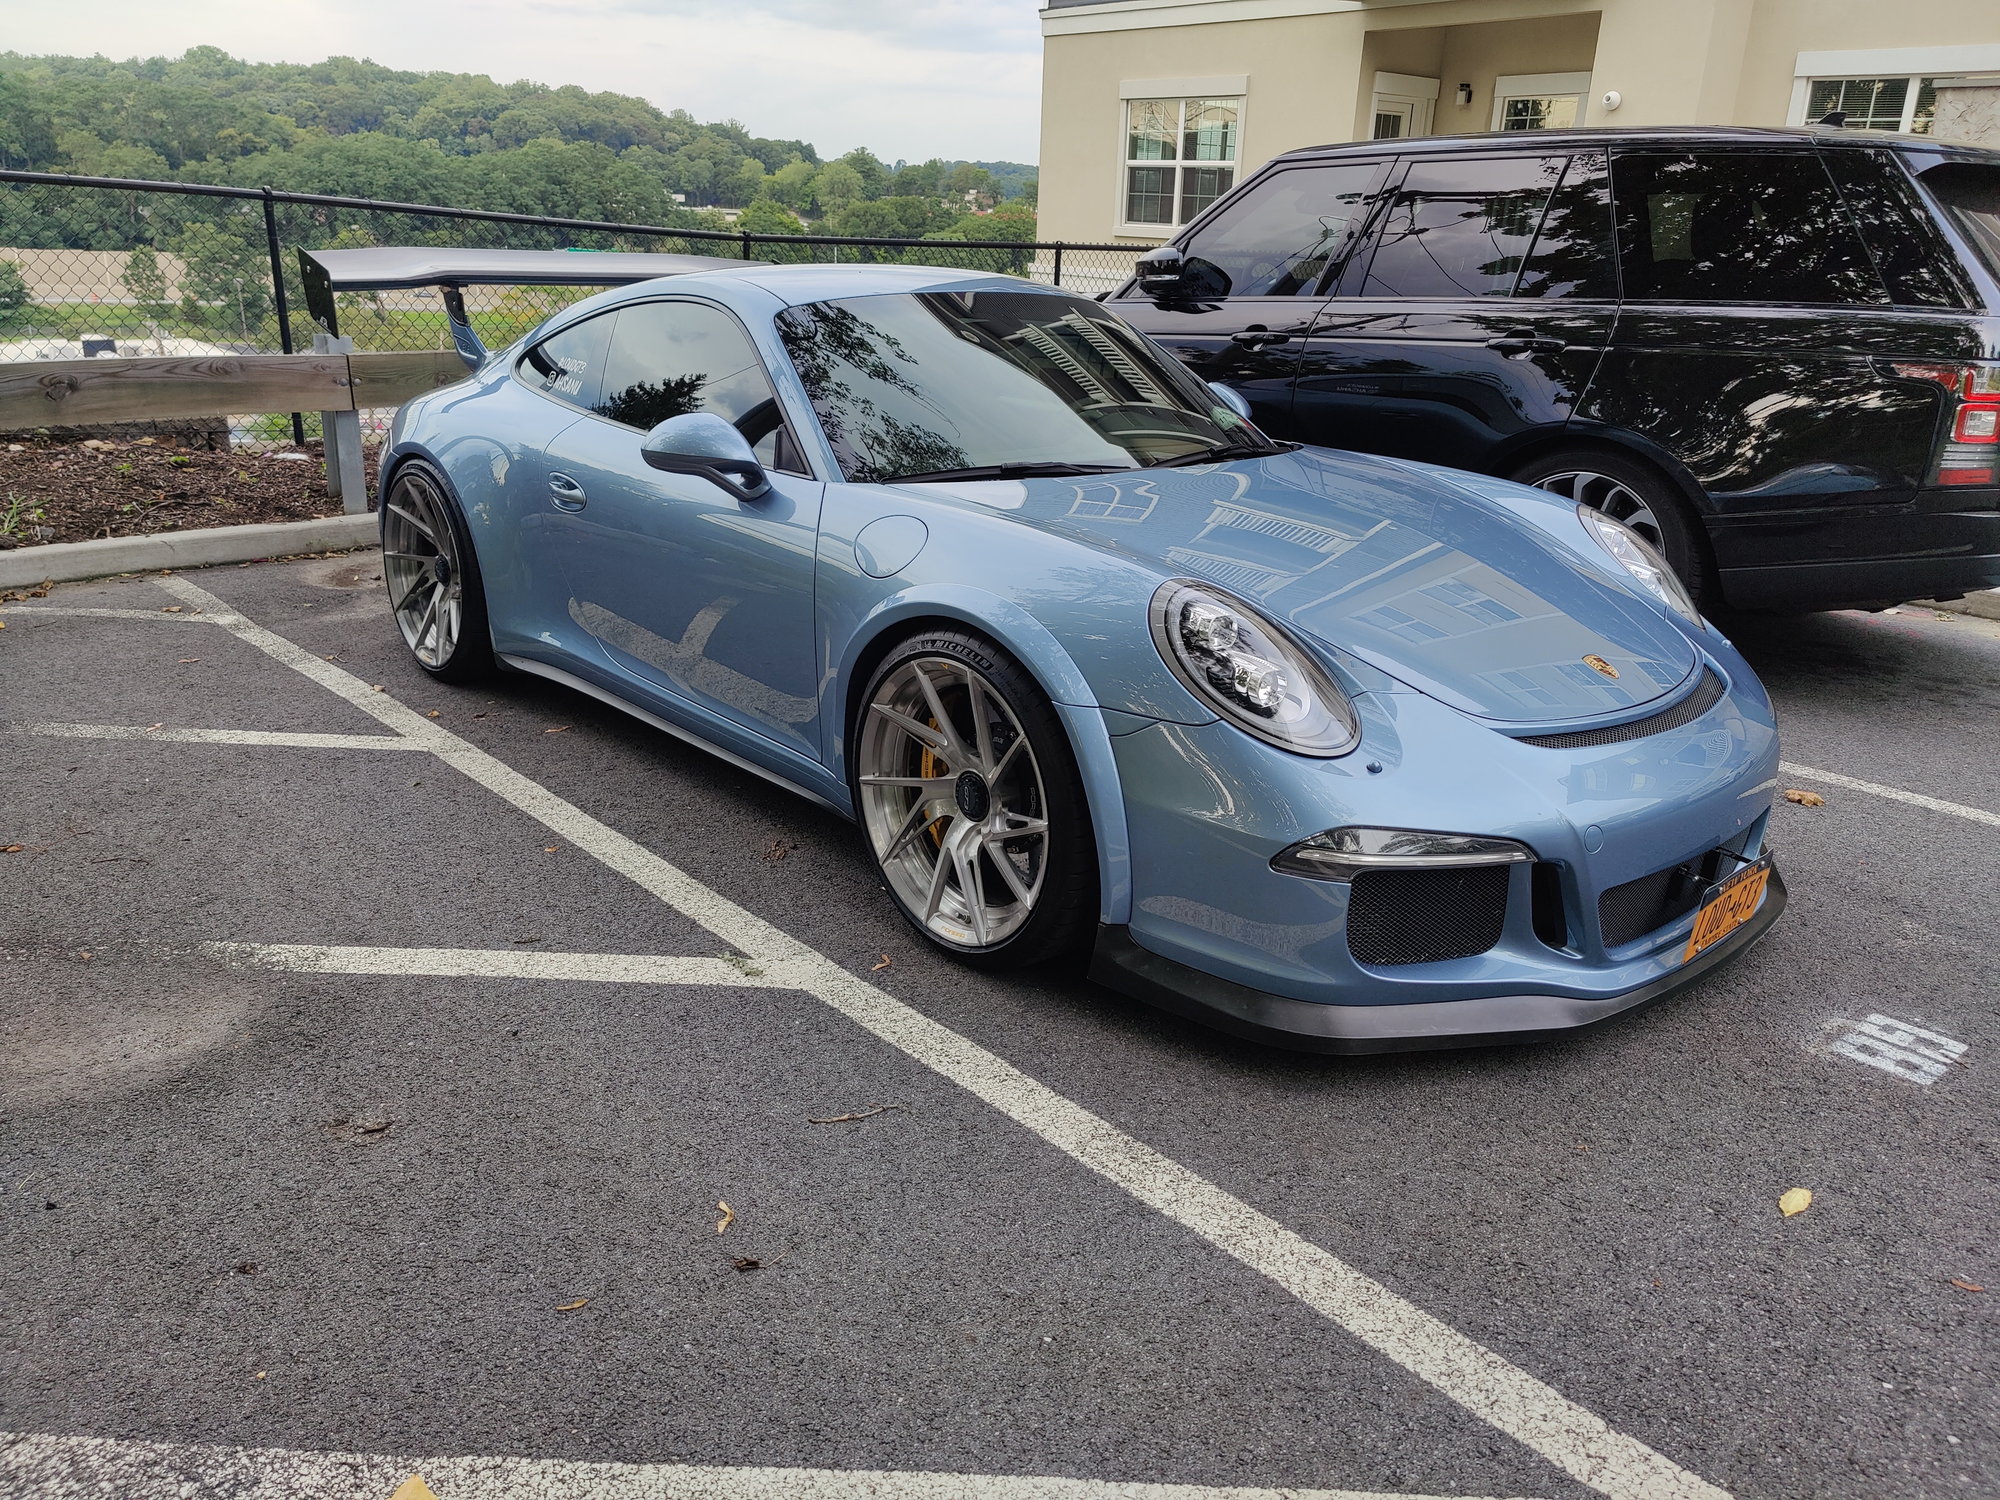 2015 Porsche GT3 - Non-Garage Queen 2015 PTS Ice Blue Metallic 991.1 GT3 - Used - VIN WP0AC2A96FS184247 - 41,000 Miles - 6 cyl - 2WD - Automatic - Coupe - Blue - New York City, NY 10469, United States